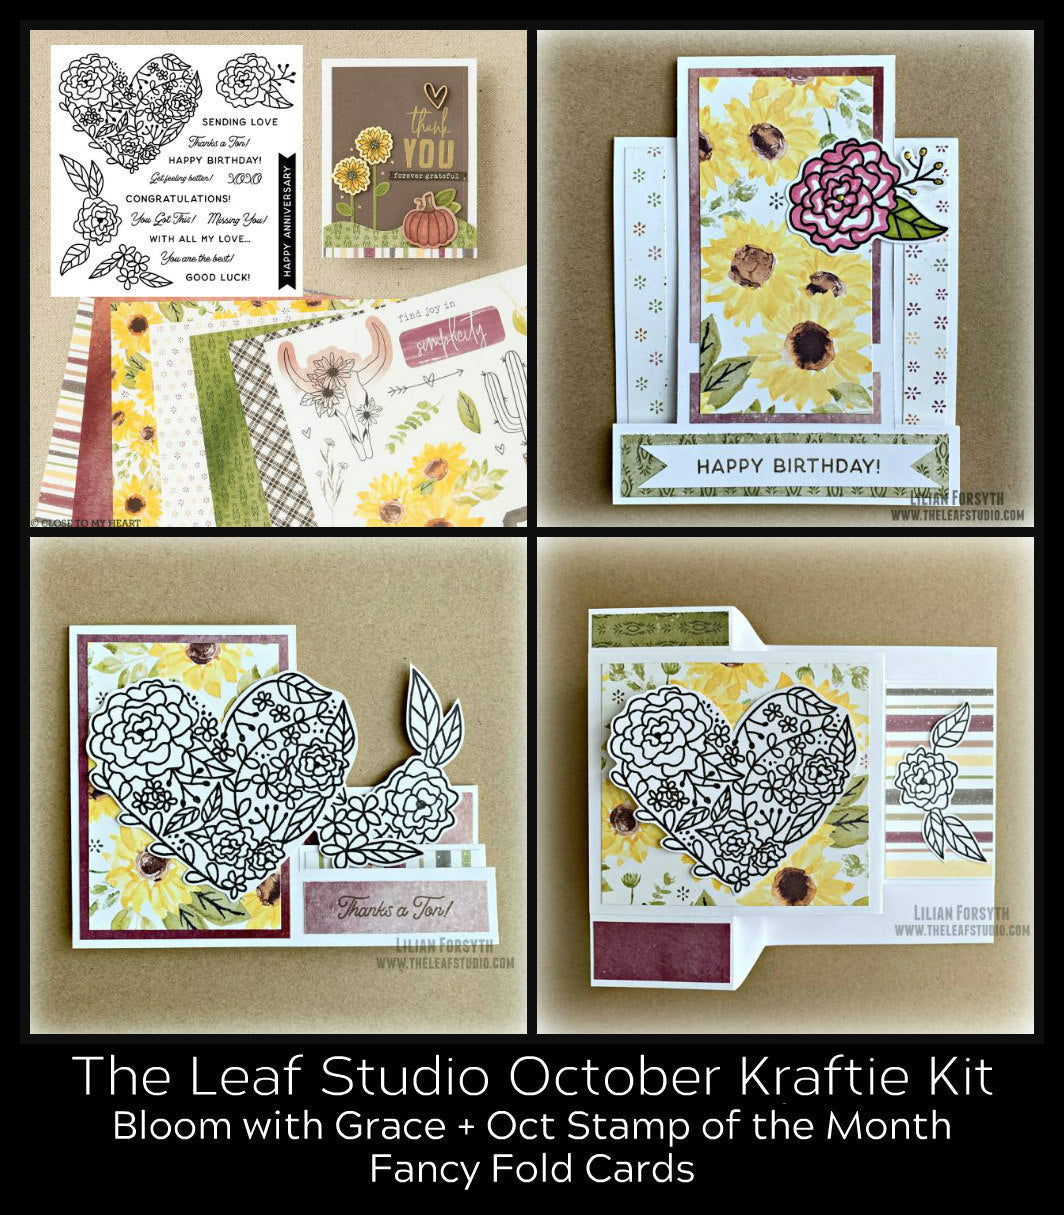 October 2020 Kraftie Kit - Bloom With Grace Fancy Fold Cards (with/without With All My Love SOTM) - Shipped